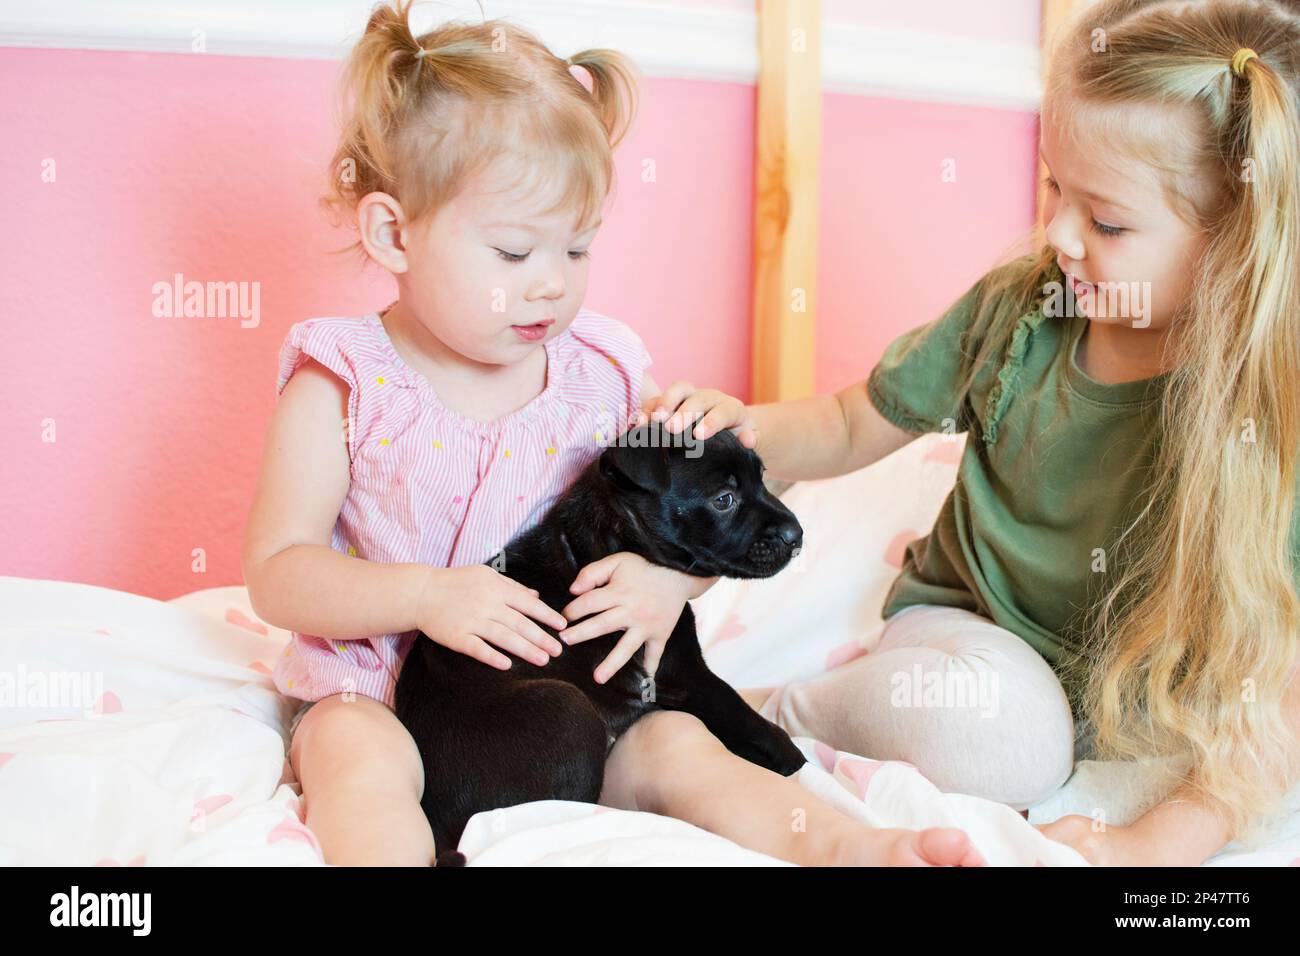 Two kids playing with a puppy. Children with a pet. Happy girls holding a dog Stock Photo